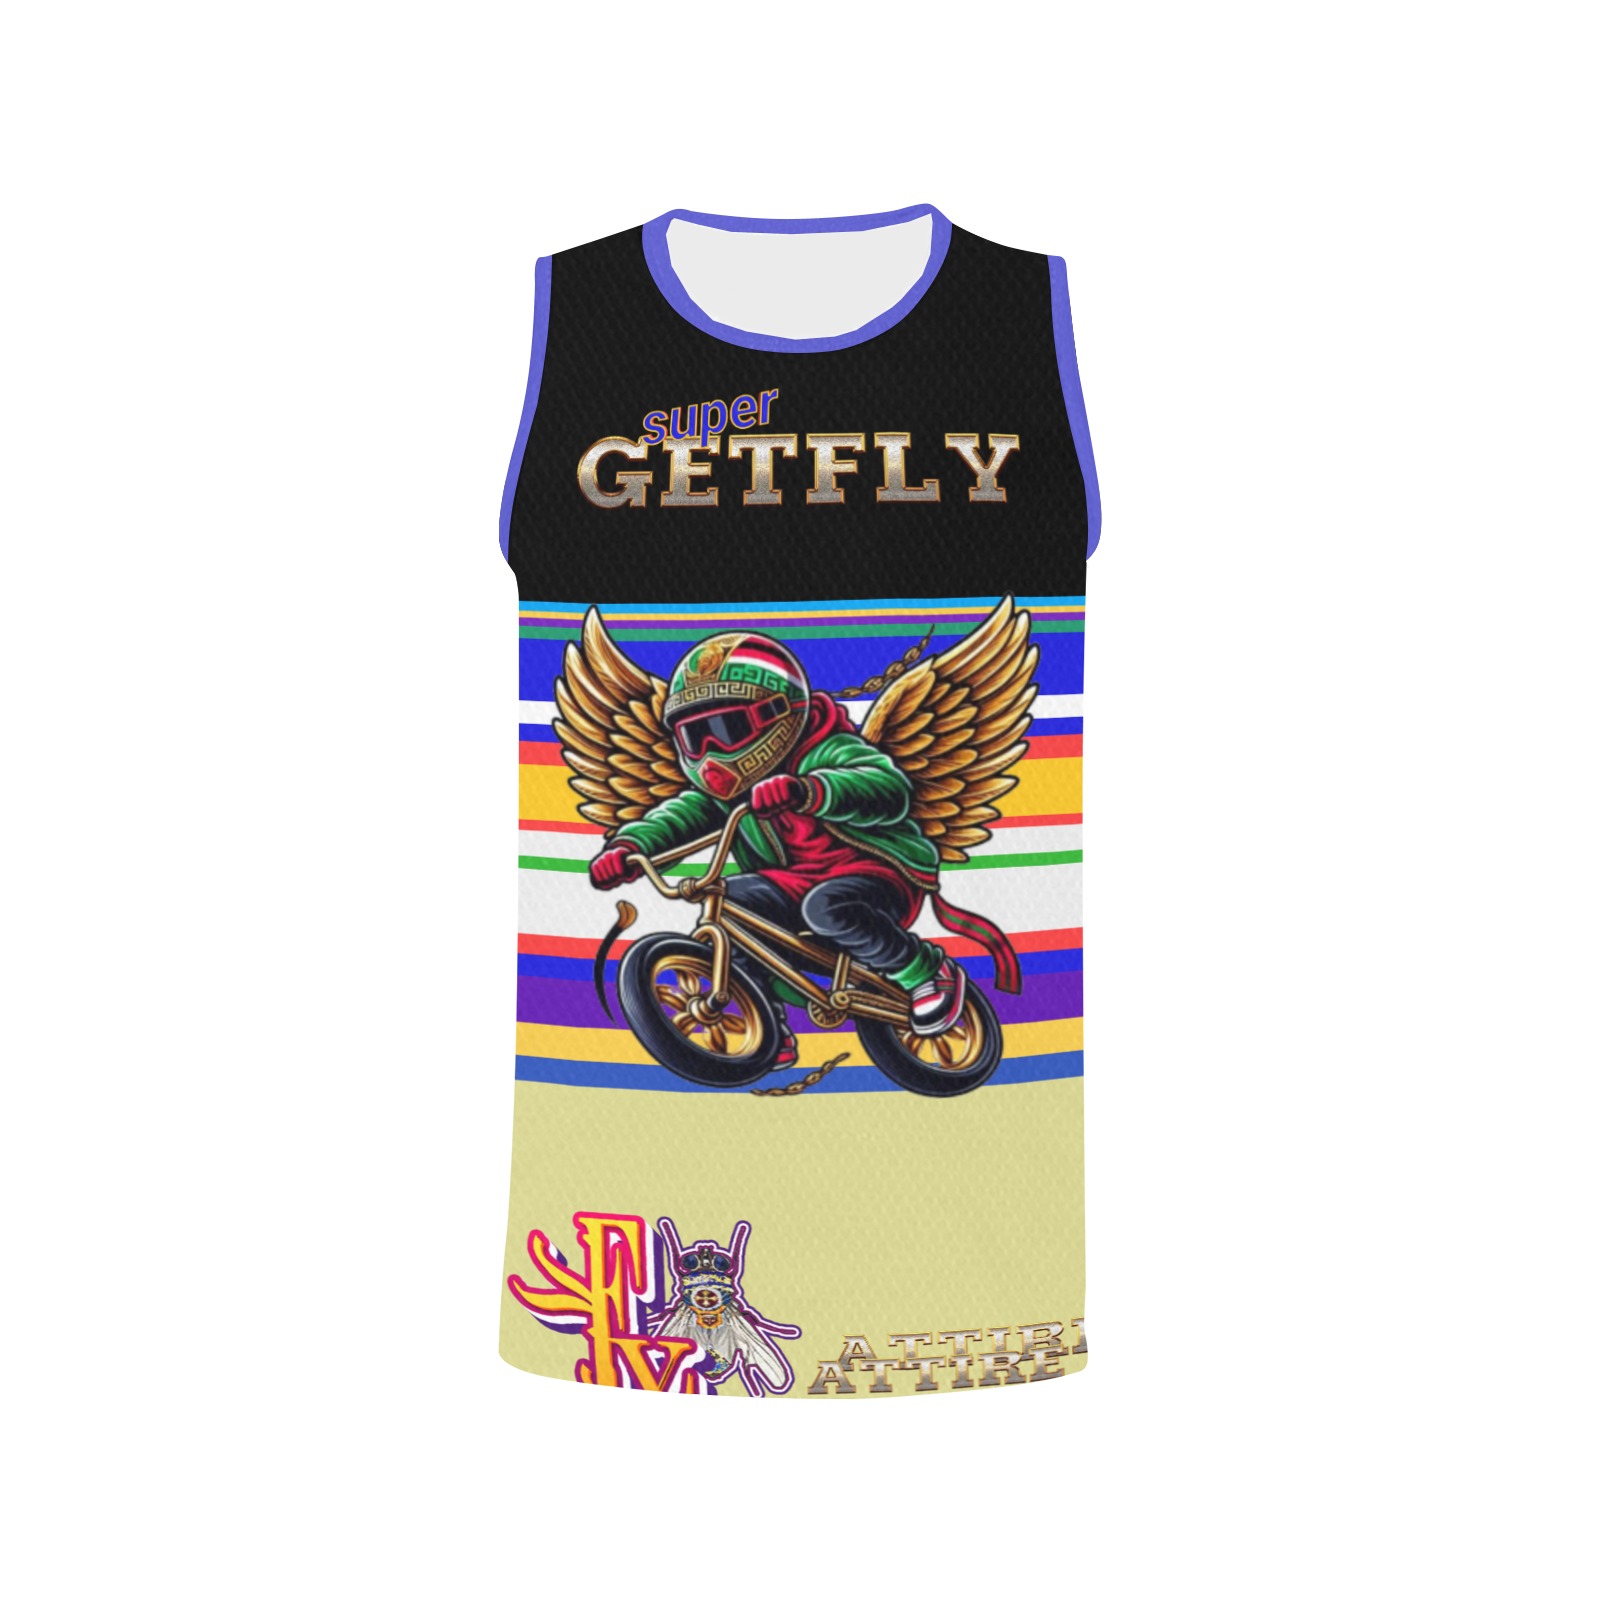 Super Getfly BMX Collectable Fly All Over Print Basketball Jersey